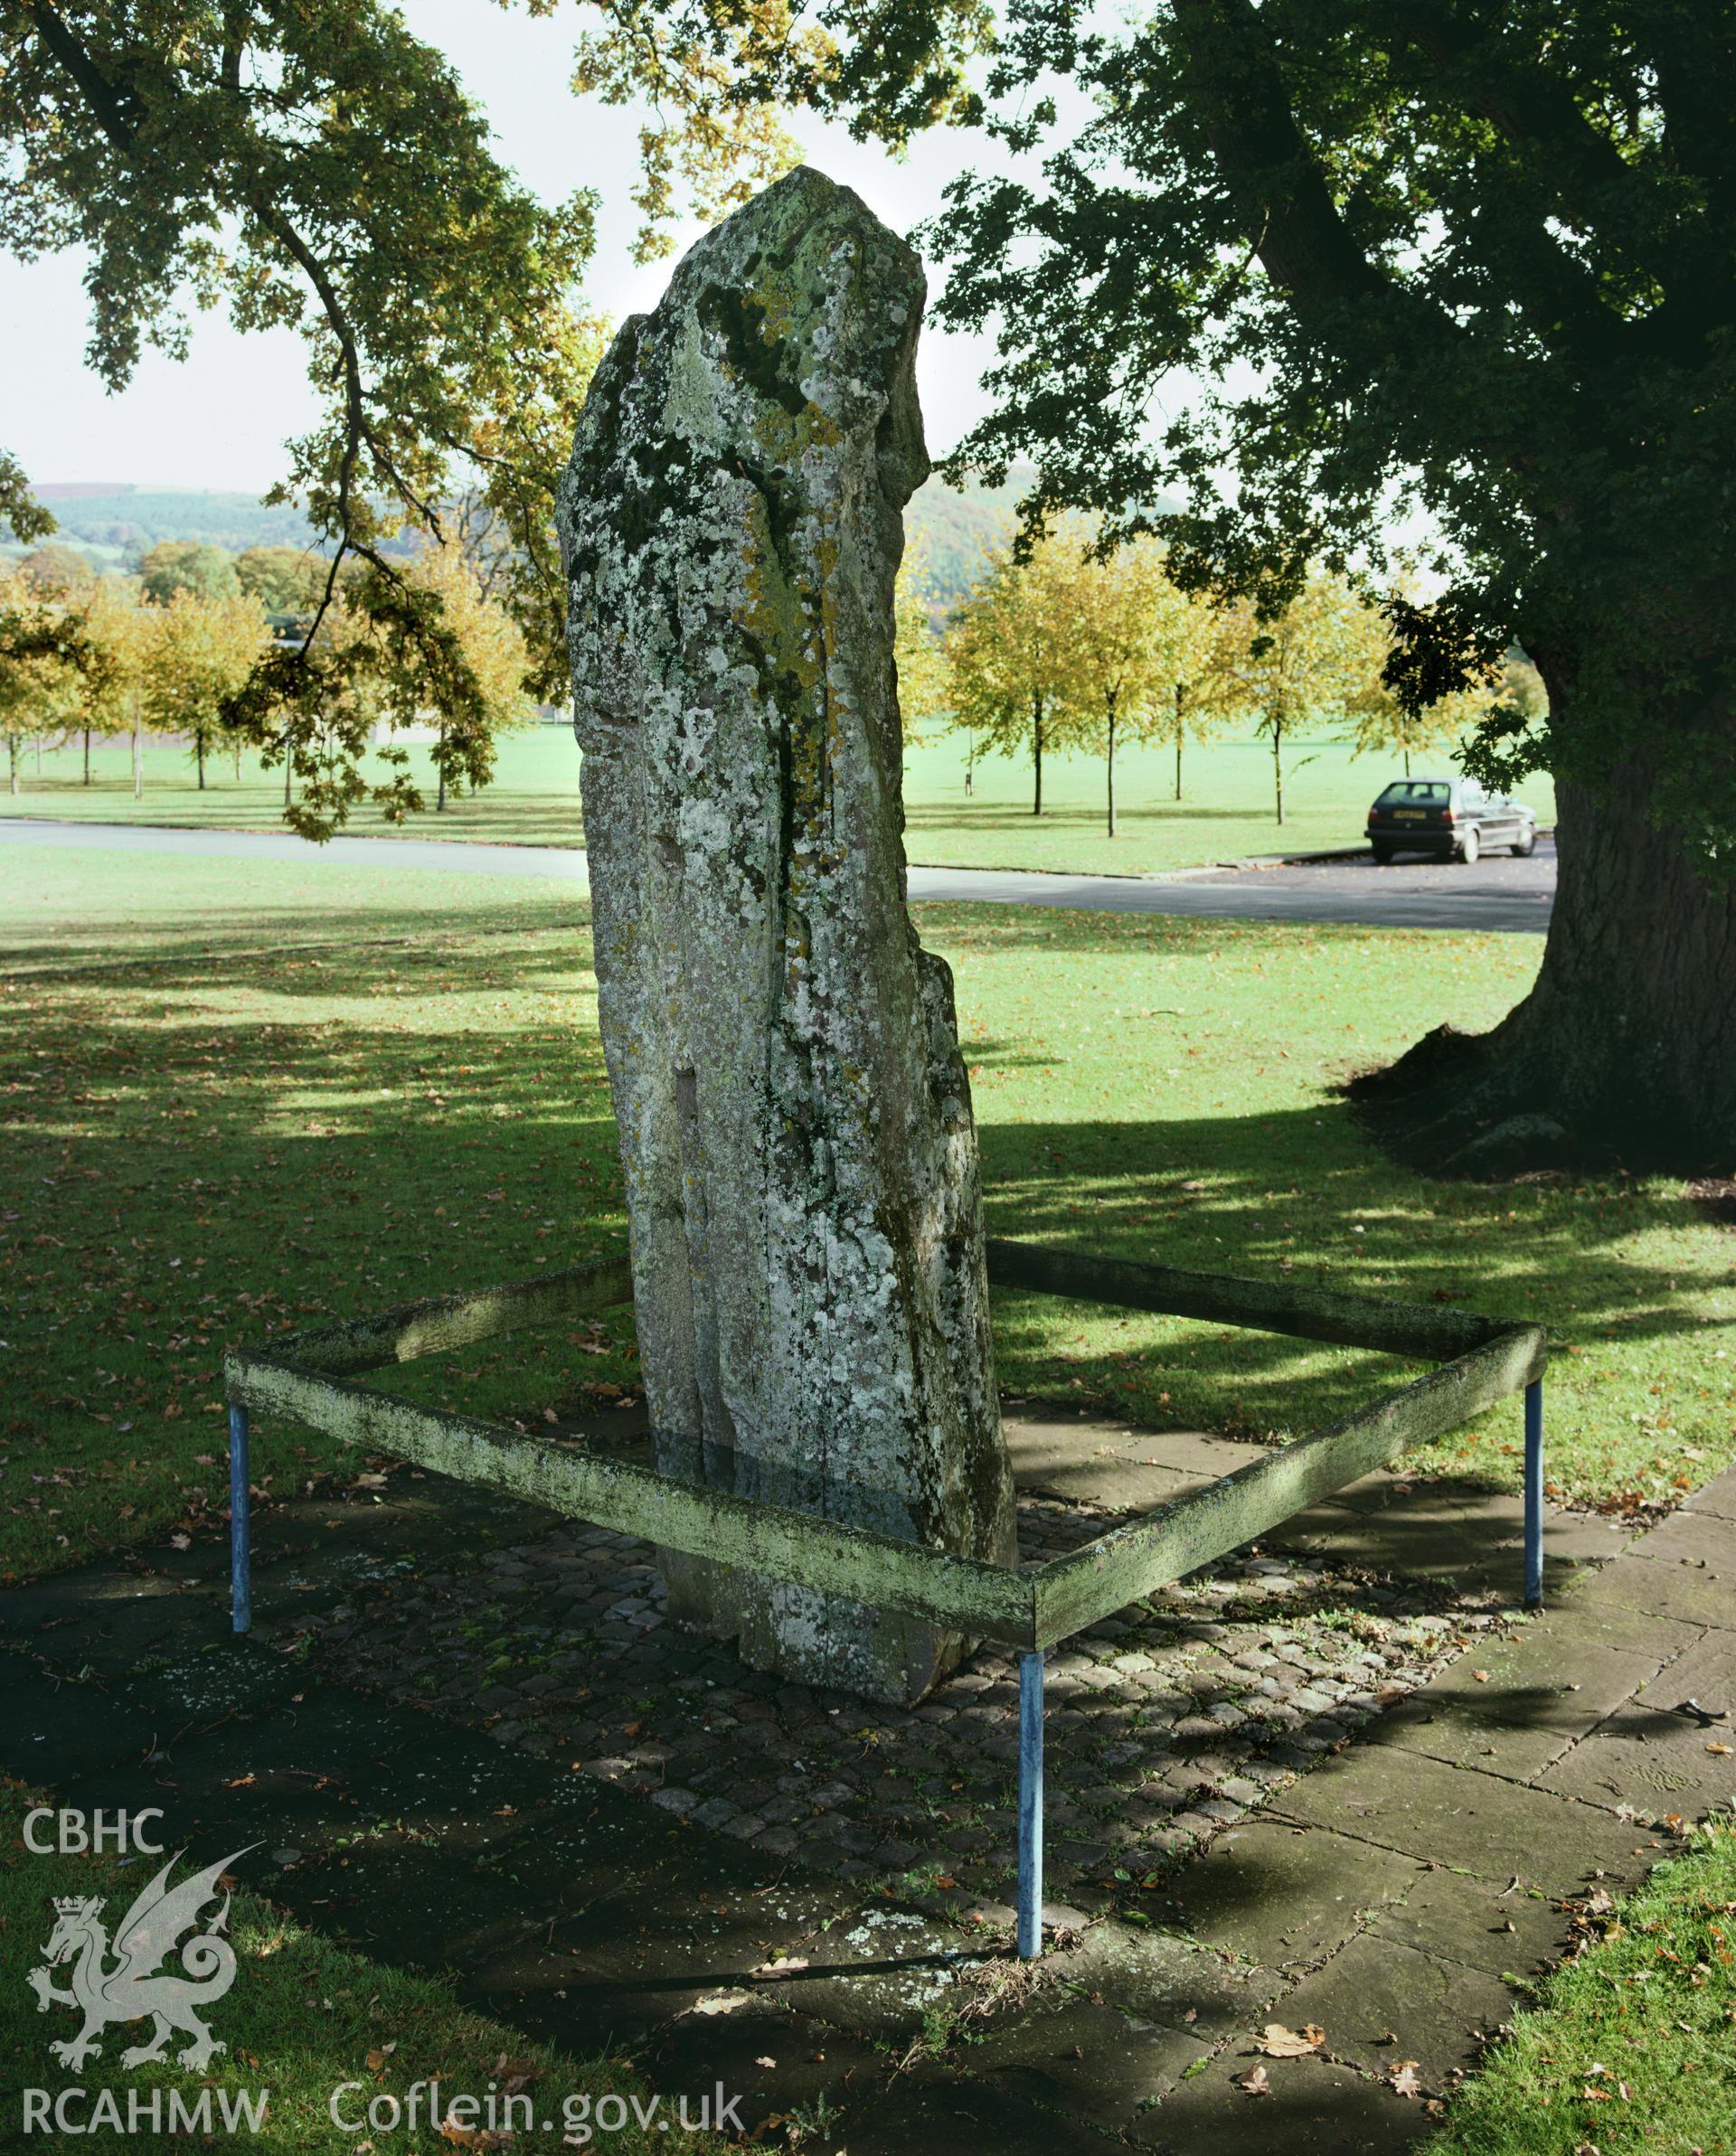 Colour transparency showing a view of Cwrt y Gollen standing stone, produced by Iain Wright, c.1981